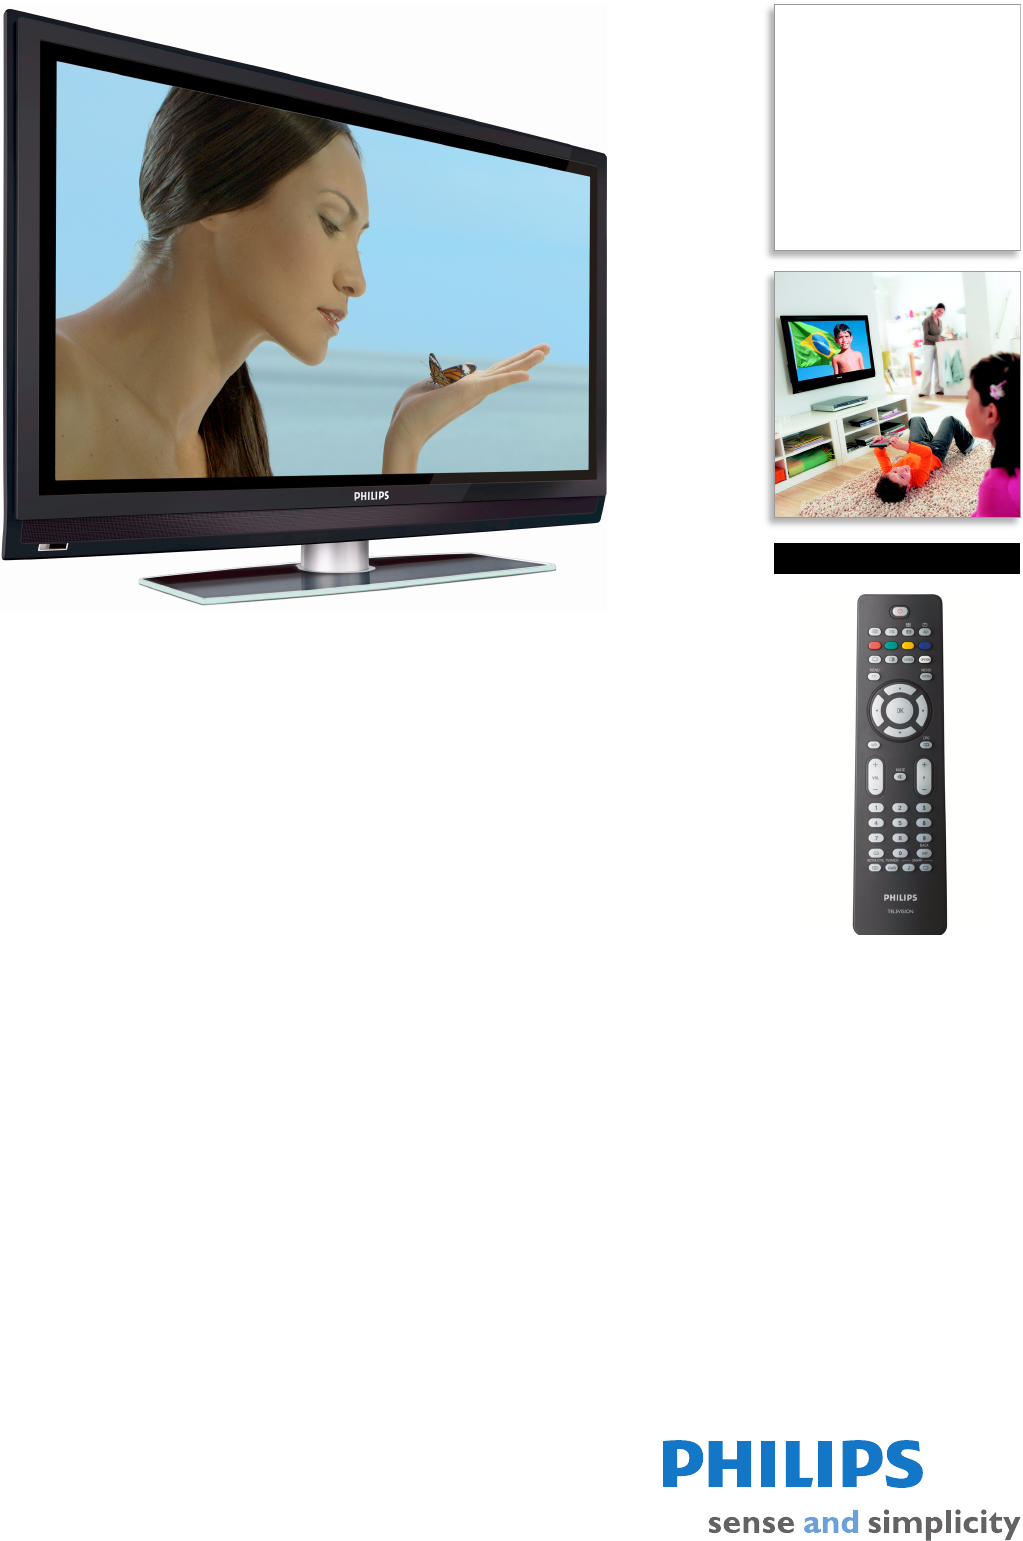 Philips Flat Panel Television 50PFP5532D User Guide | ManualsOnline.com